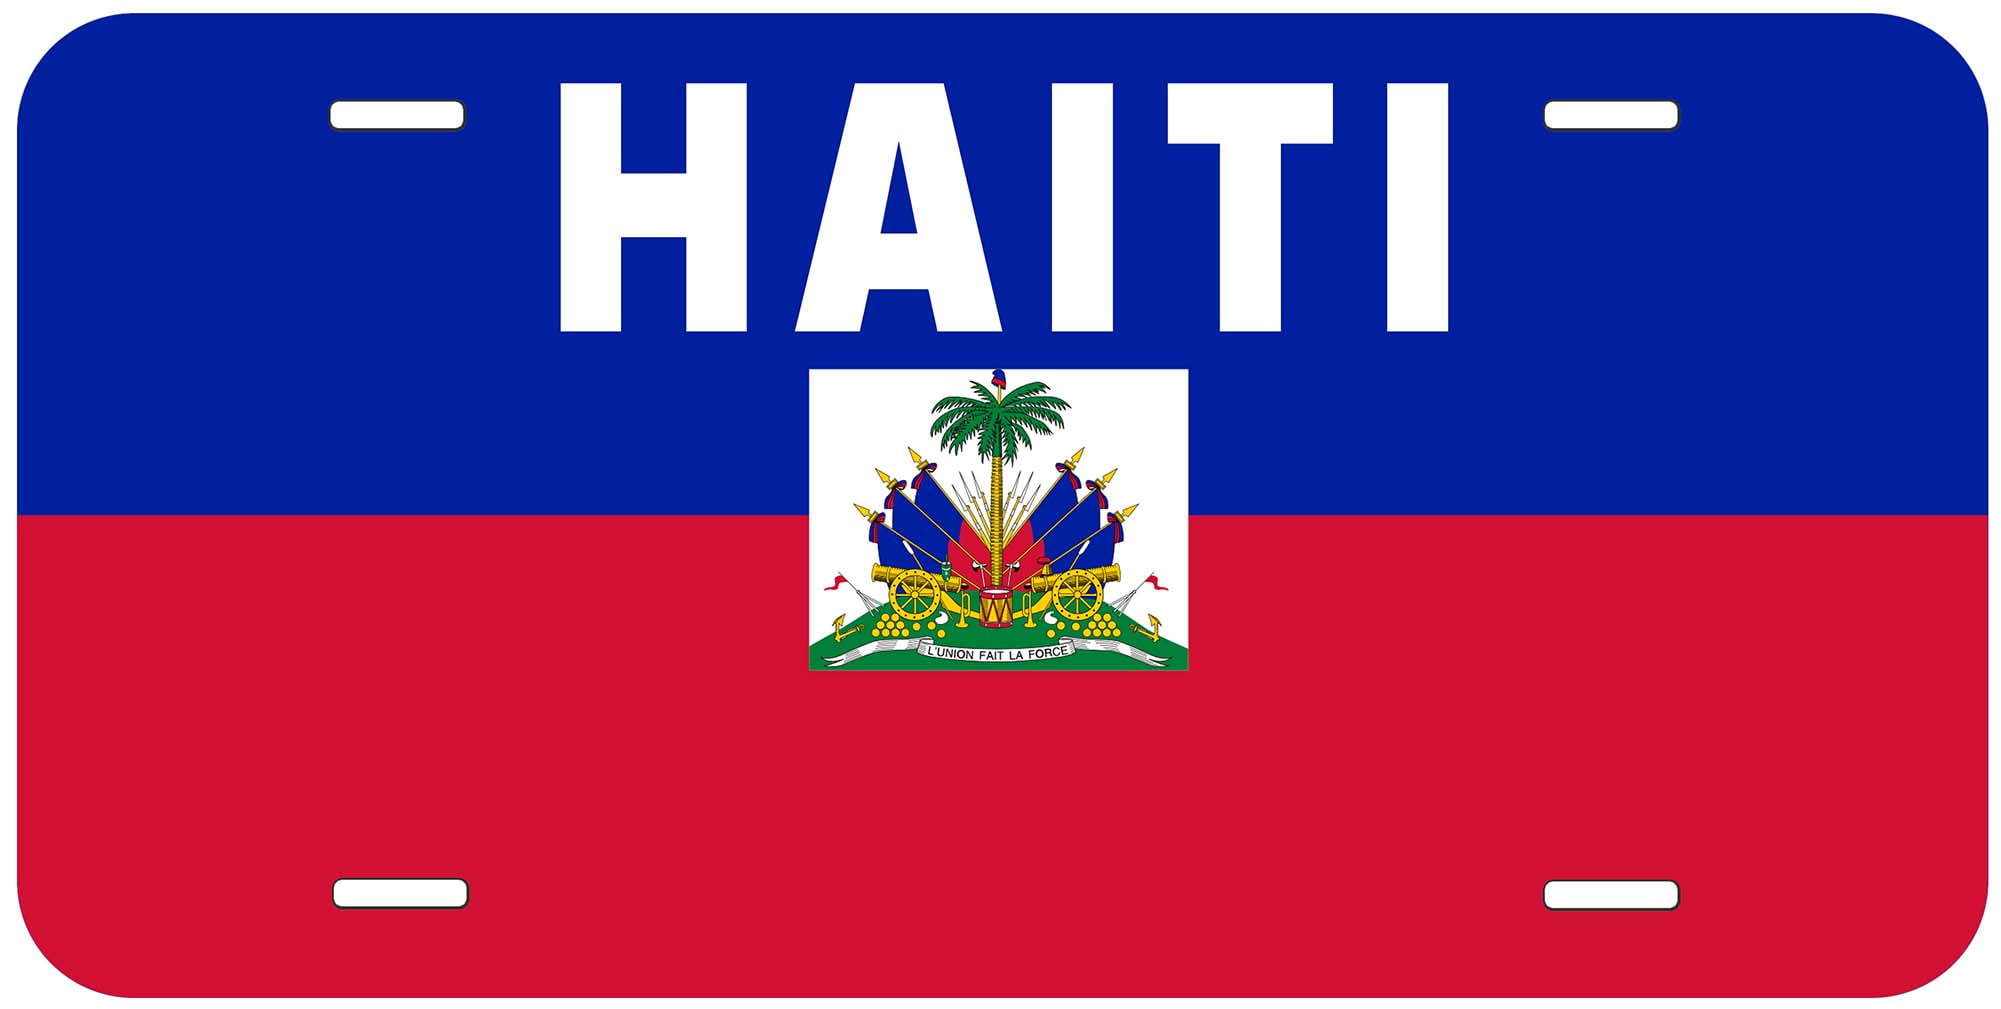 Haiti Country Flag Name License Plate Car Decoration Stainless Steel Accessory 